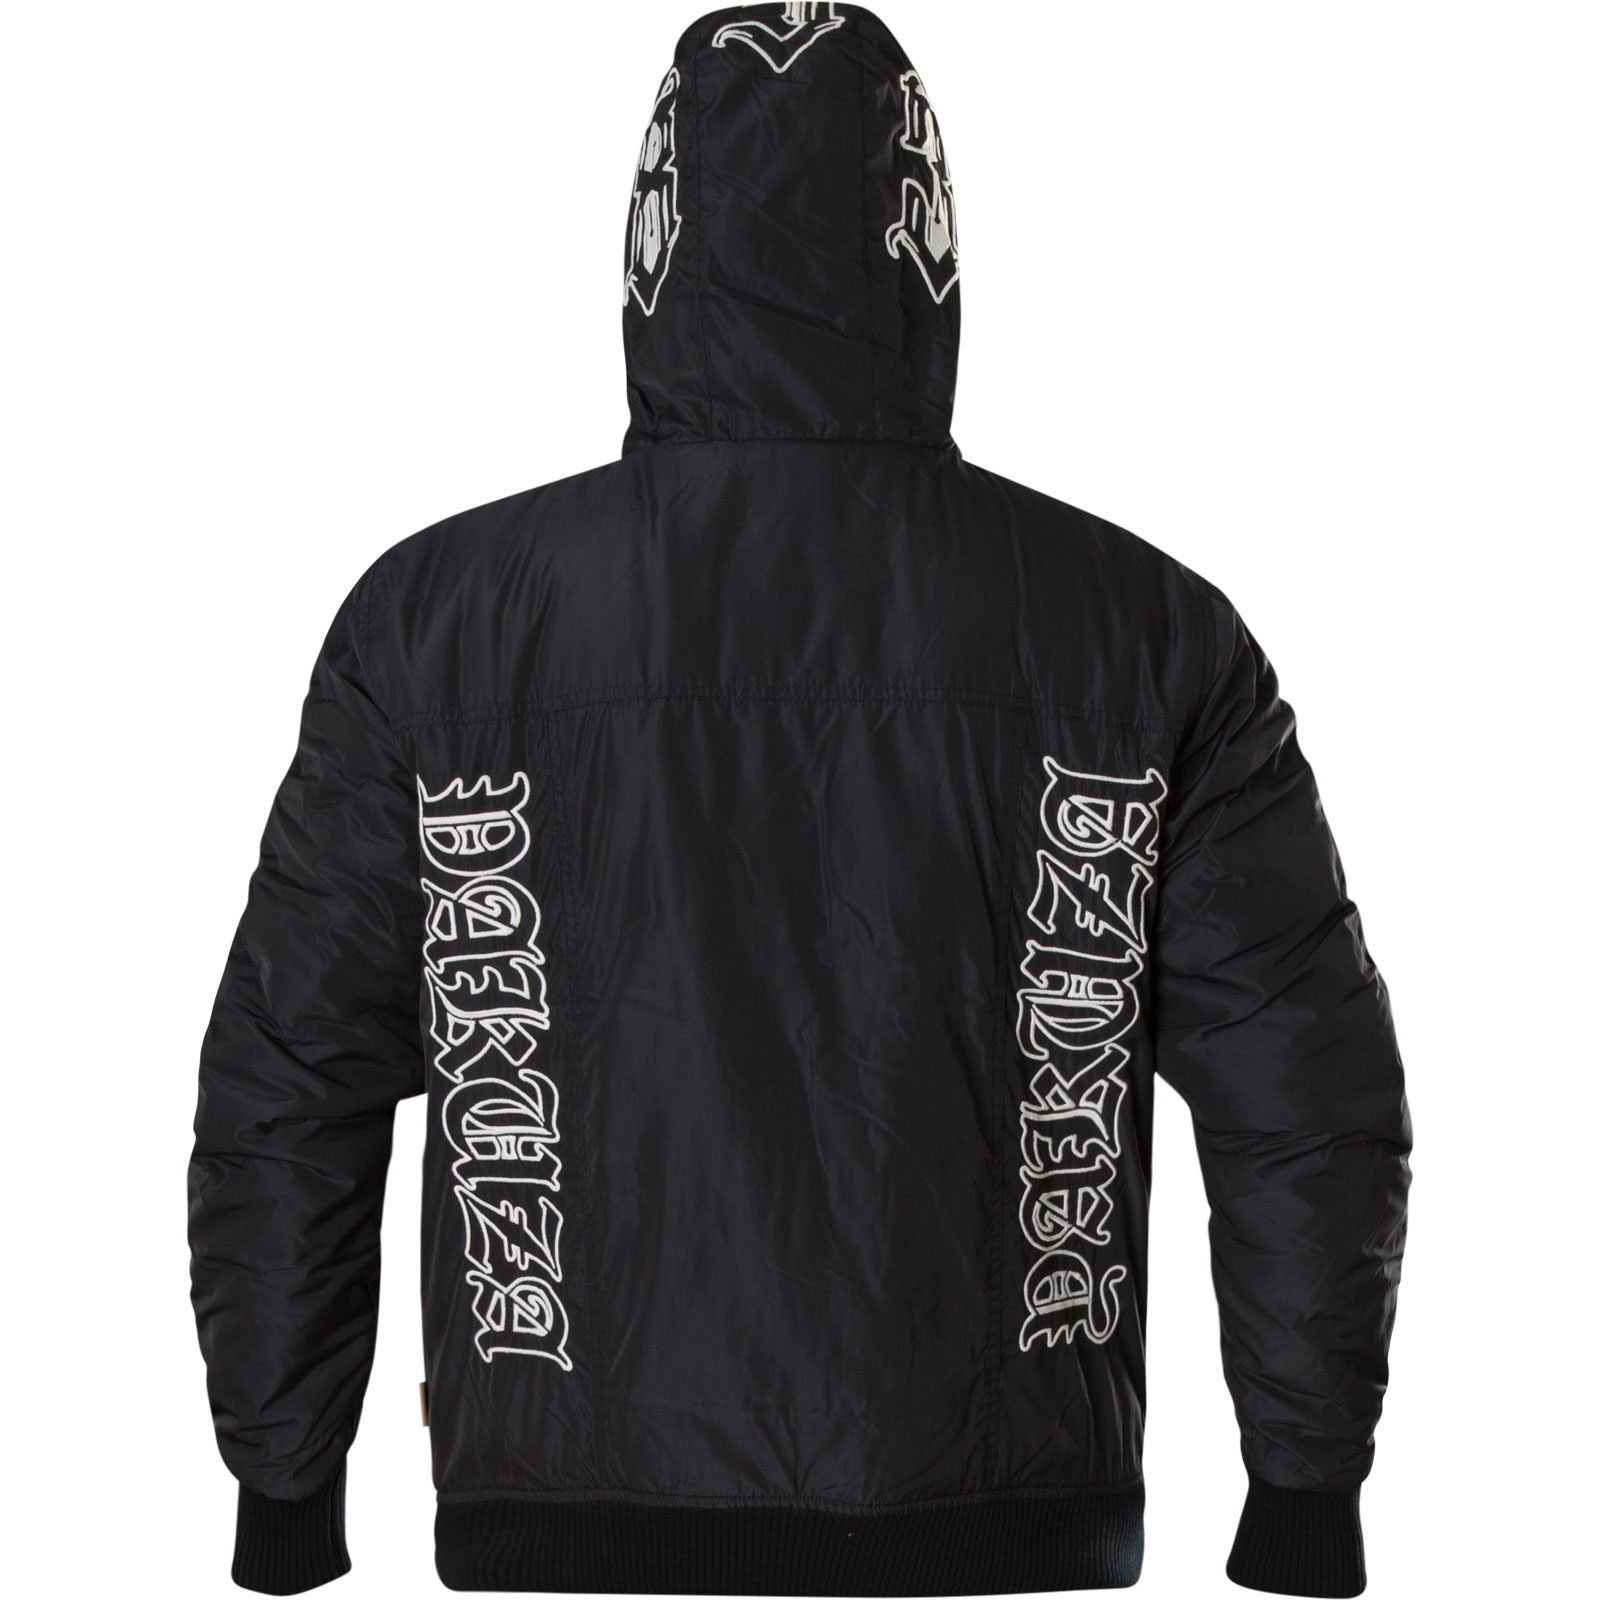 Yakuza 893 Hooded Bomber Jacket JB-12063 with embroidered lettering